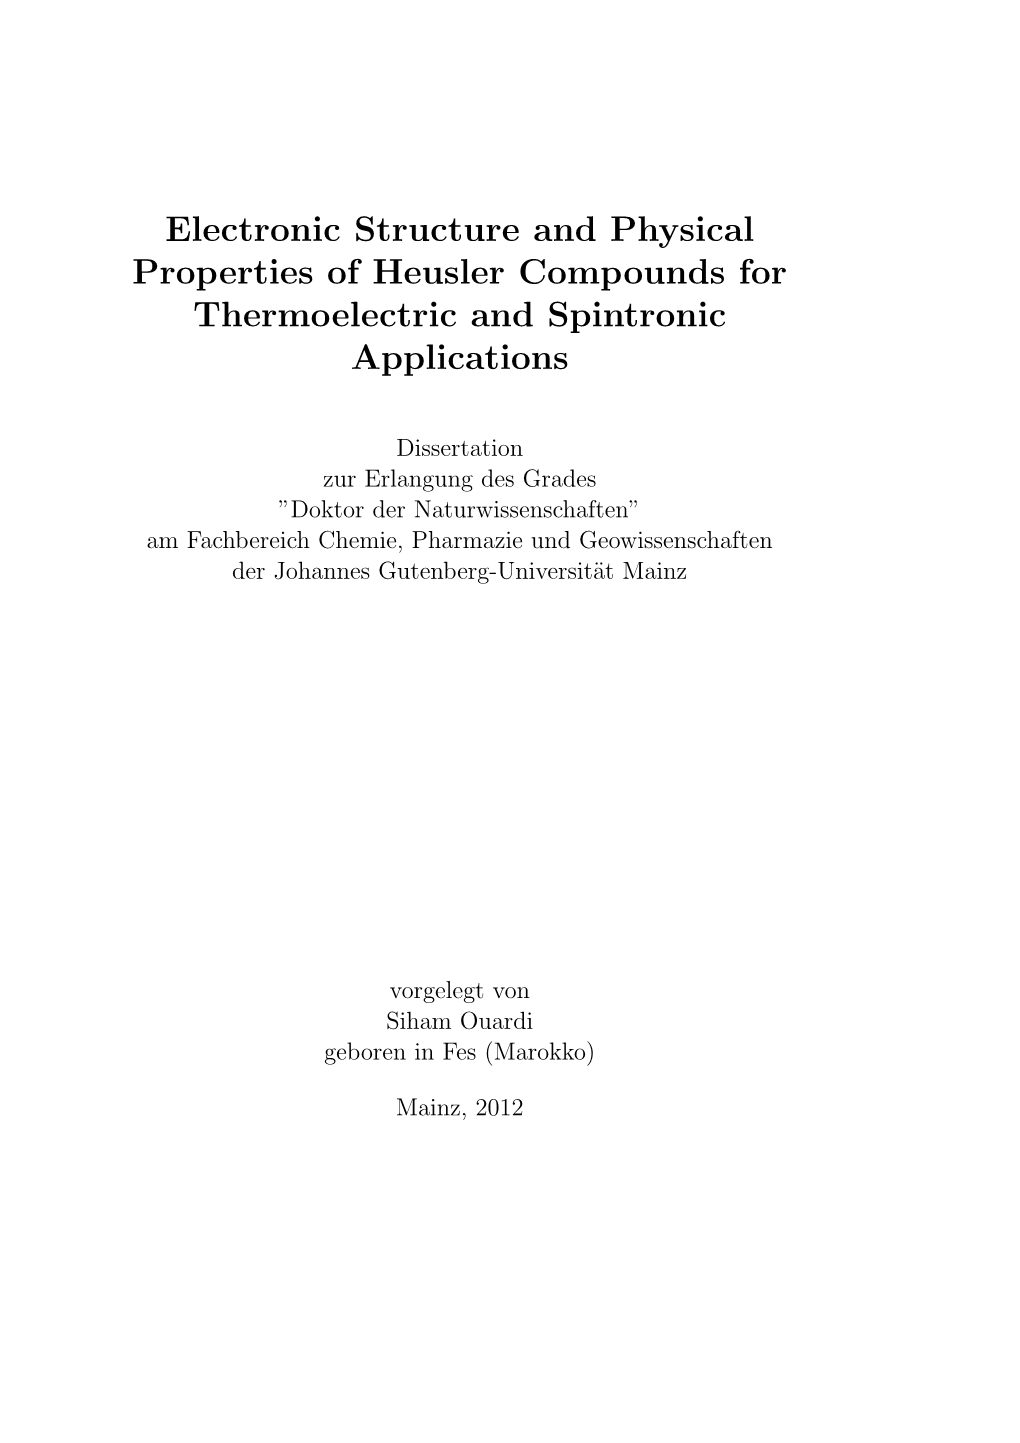 Electronic Structure and Physical Properties of Heusler Compounds for Thermoelectric and Spintronic Applications